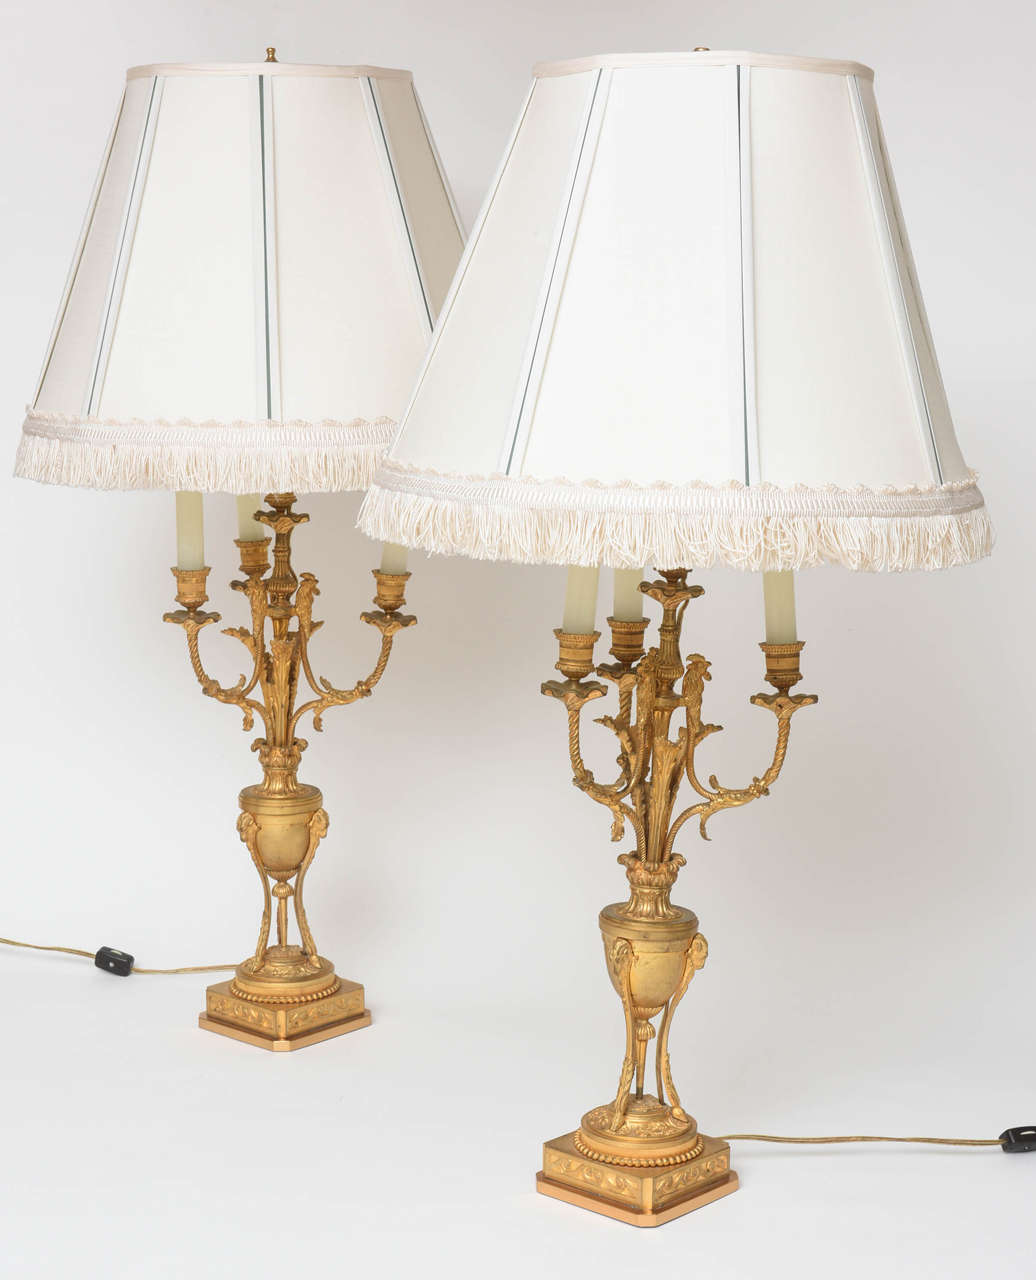 Louis XVI Superb Pair of French Neoclassical Ormolu Candelabra Lamps